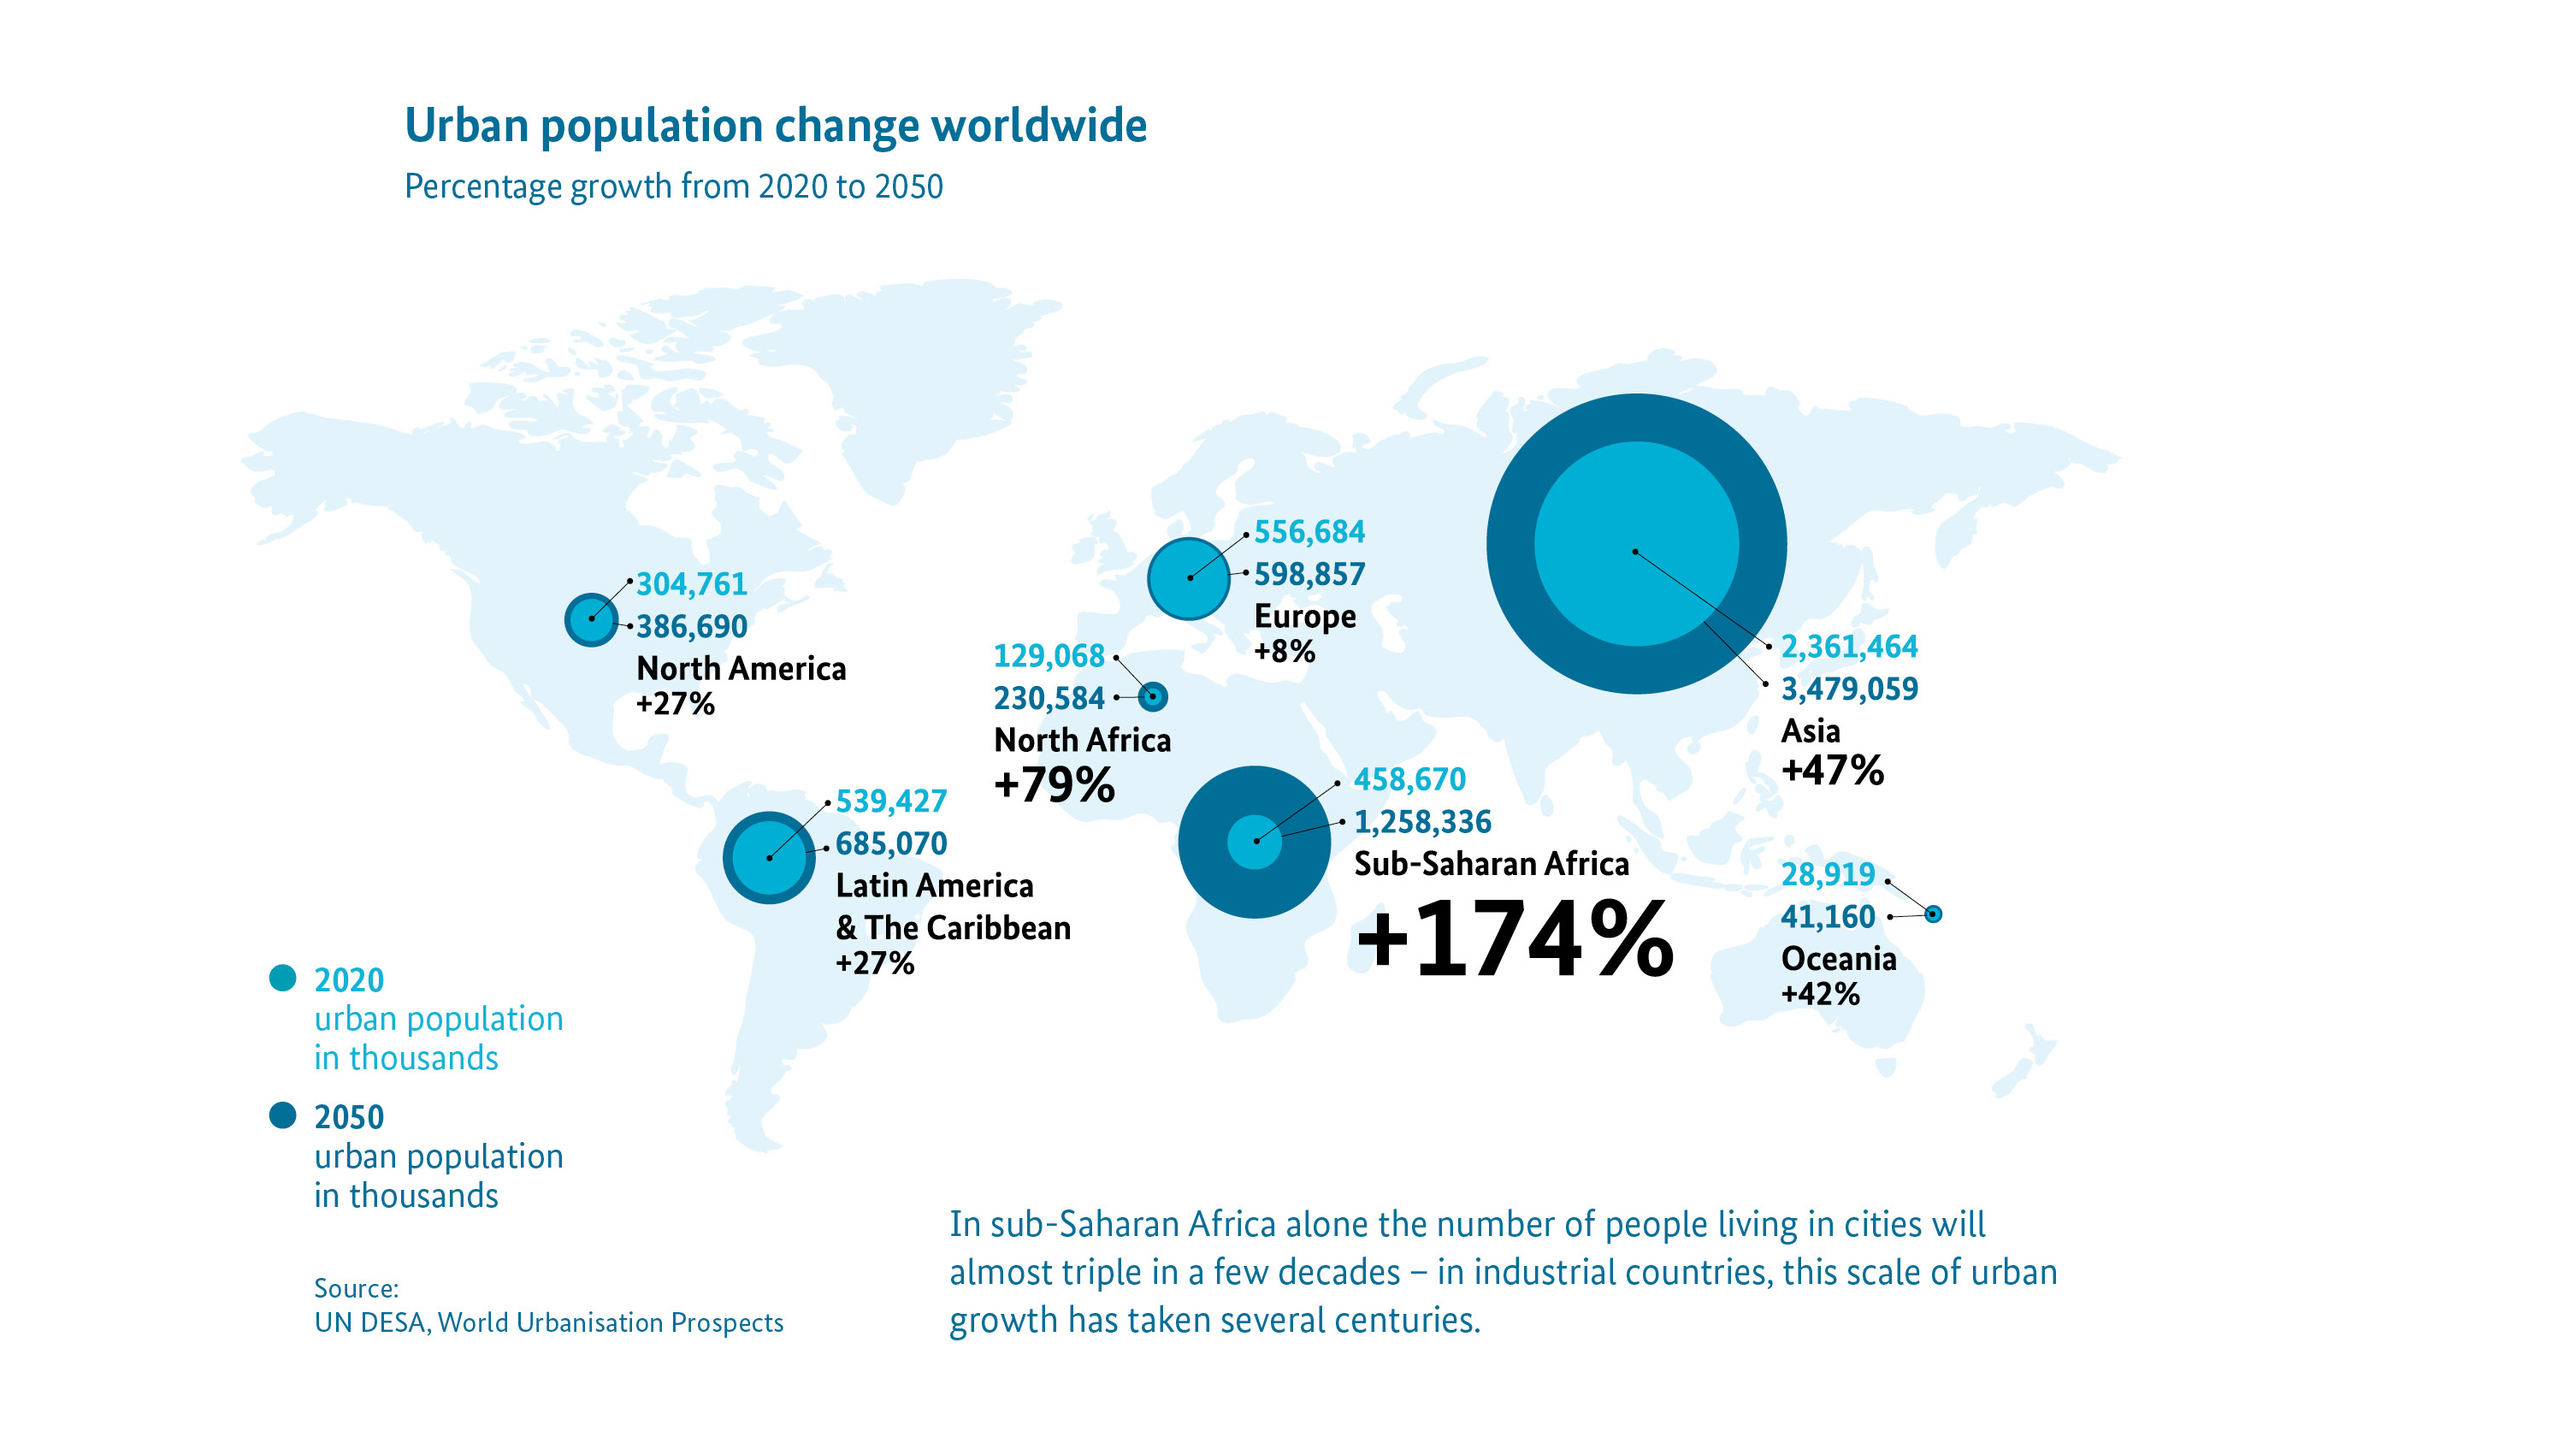 Urban population change worldwide (Percentage growth from 2020 to 2050): In sub-Saharan Africa alone the number of people living in cities will almost triple in a few decades – in industrial countries, this scale of urban growth has taken several centuries.